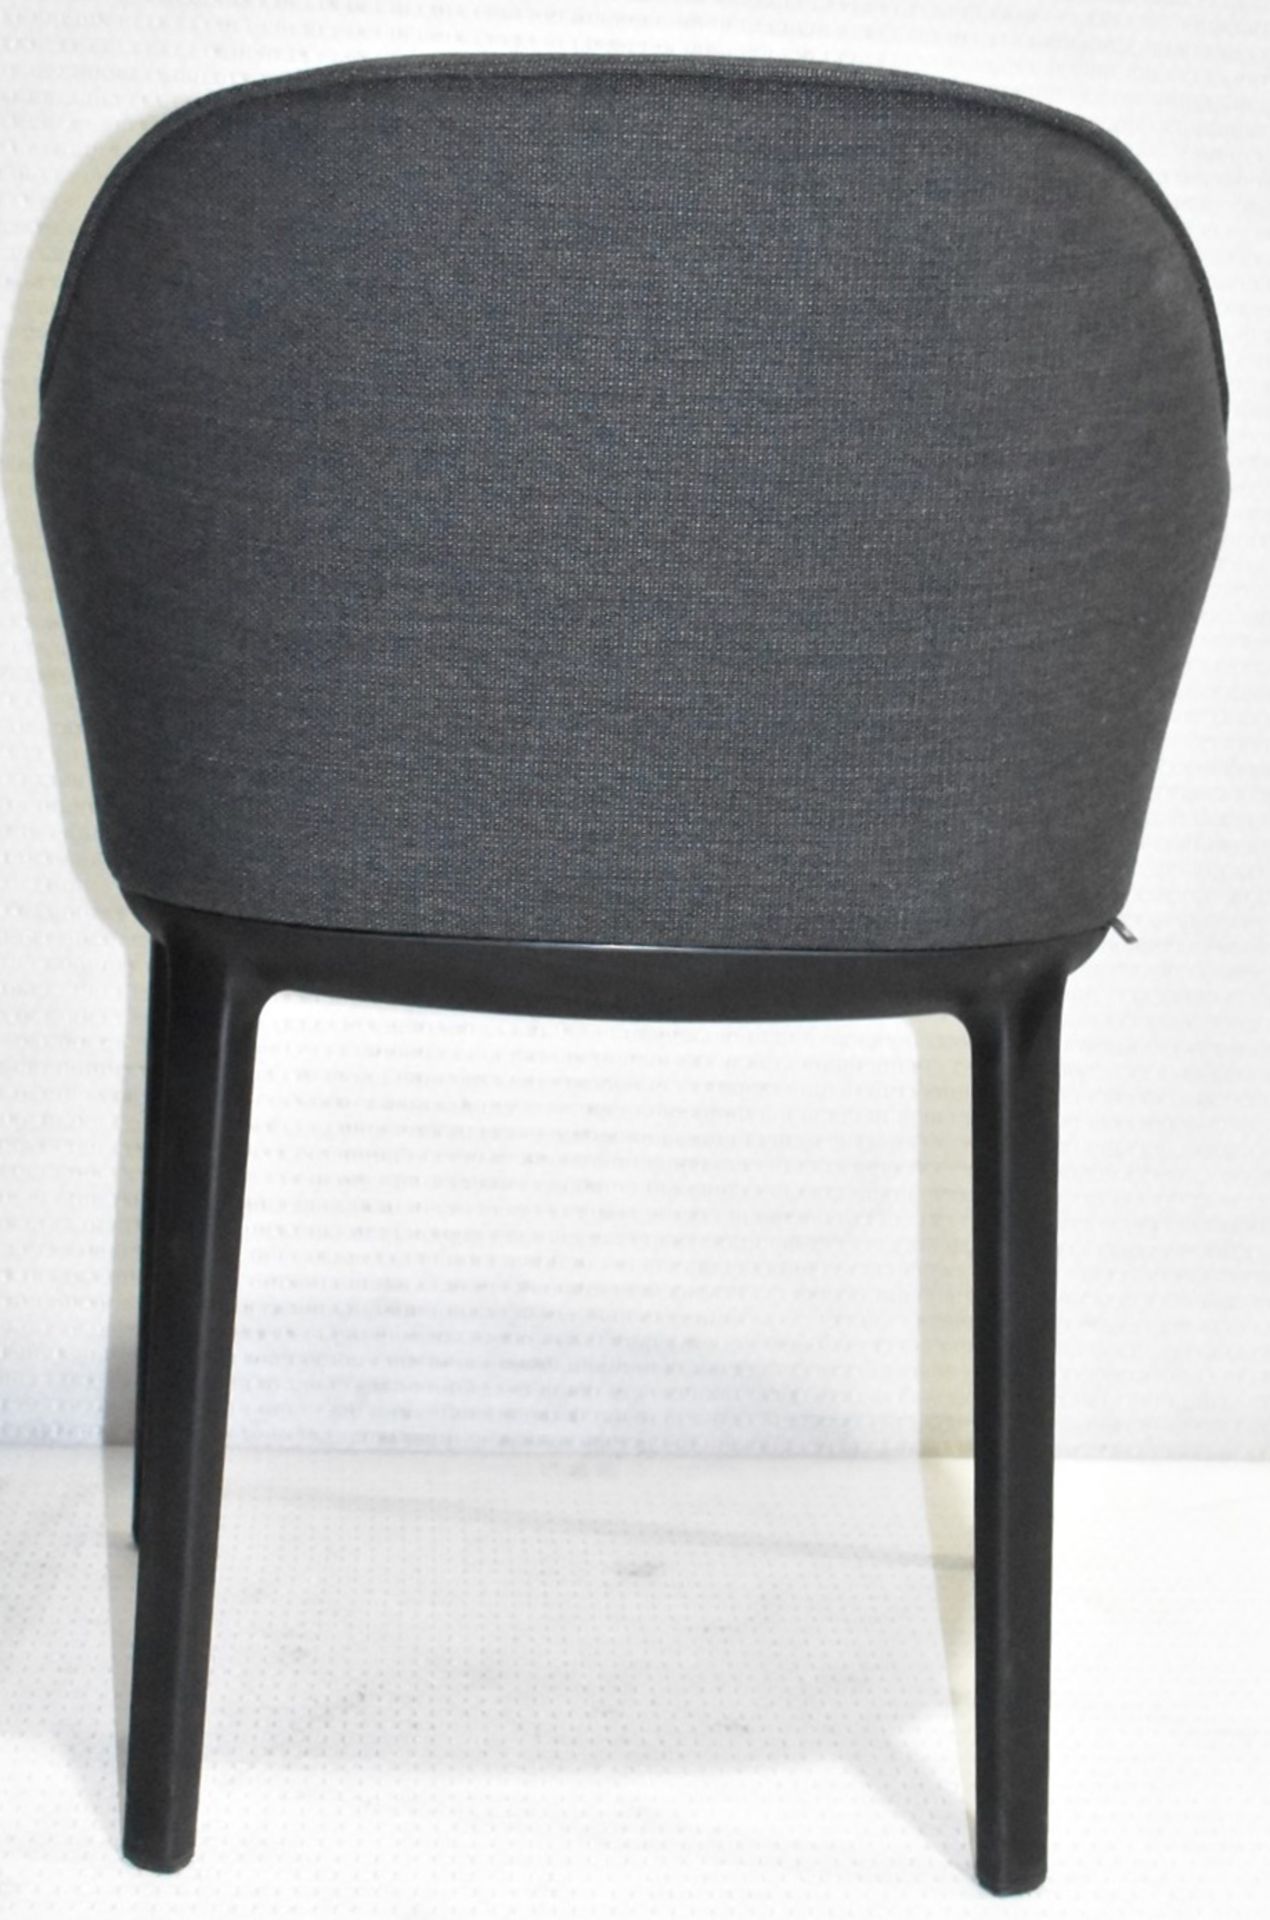 1 x VITRA 'Softshell' Fabric Upholstered Designer Plastic Armchair, in Anthracite Grey - RRP £885.00 - Image 6 of 9